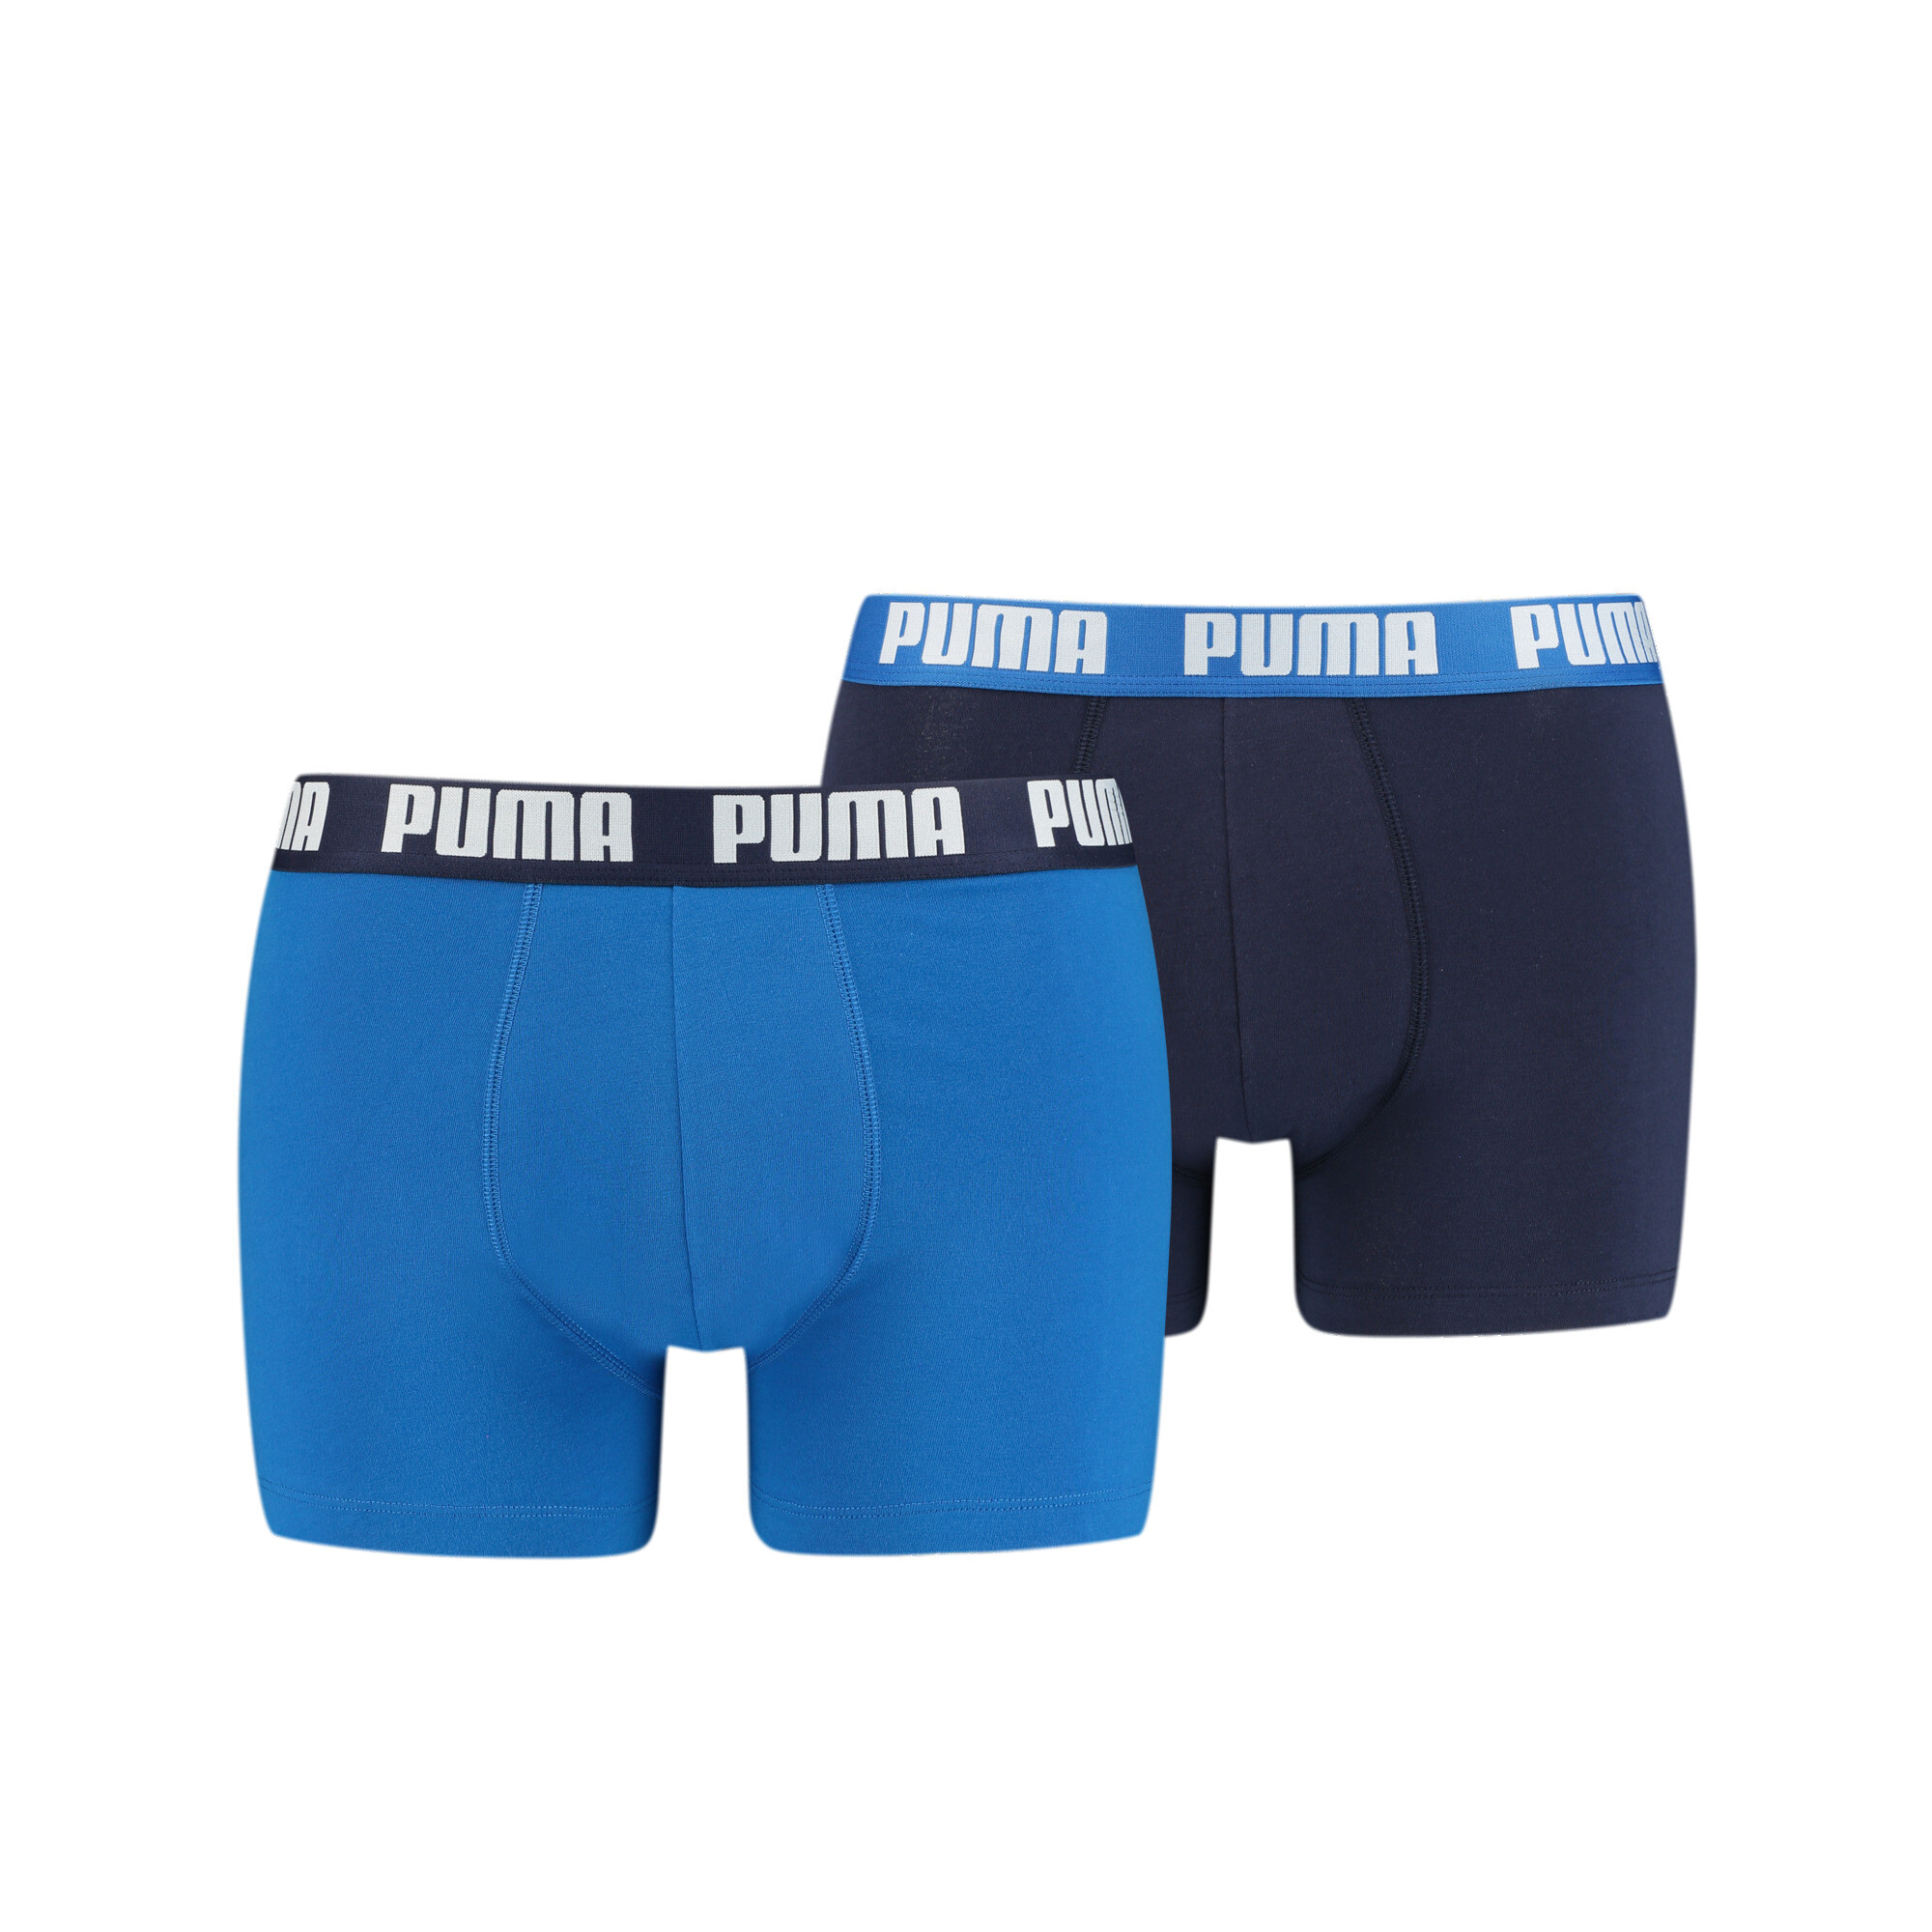 Men's PUMA Basic Short Boxer 2 Pack In Blue, Size Small